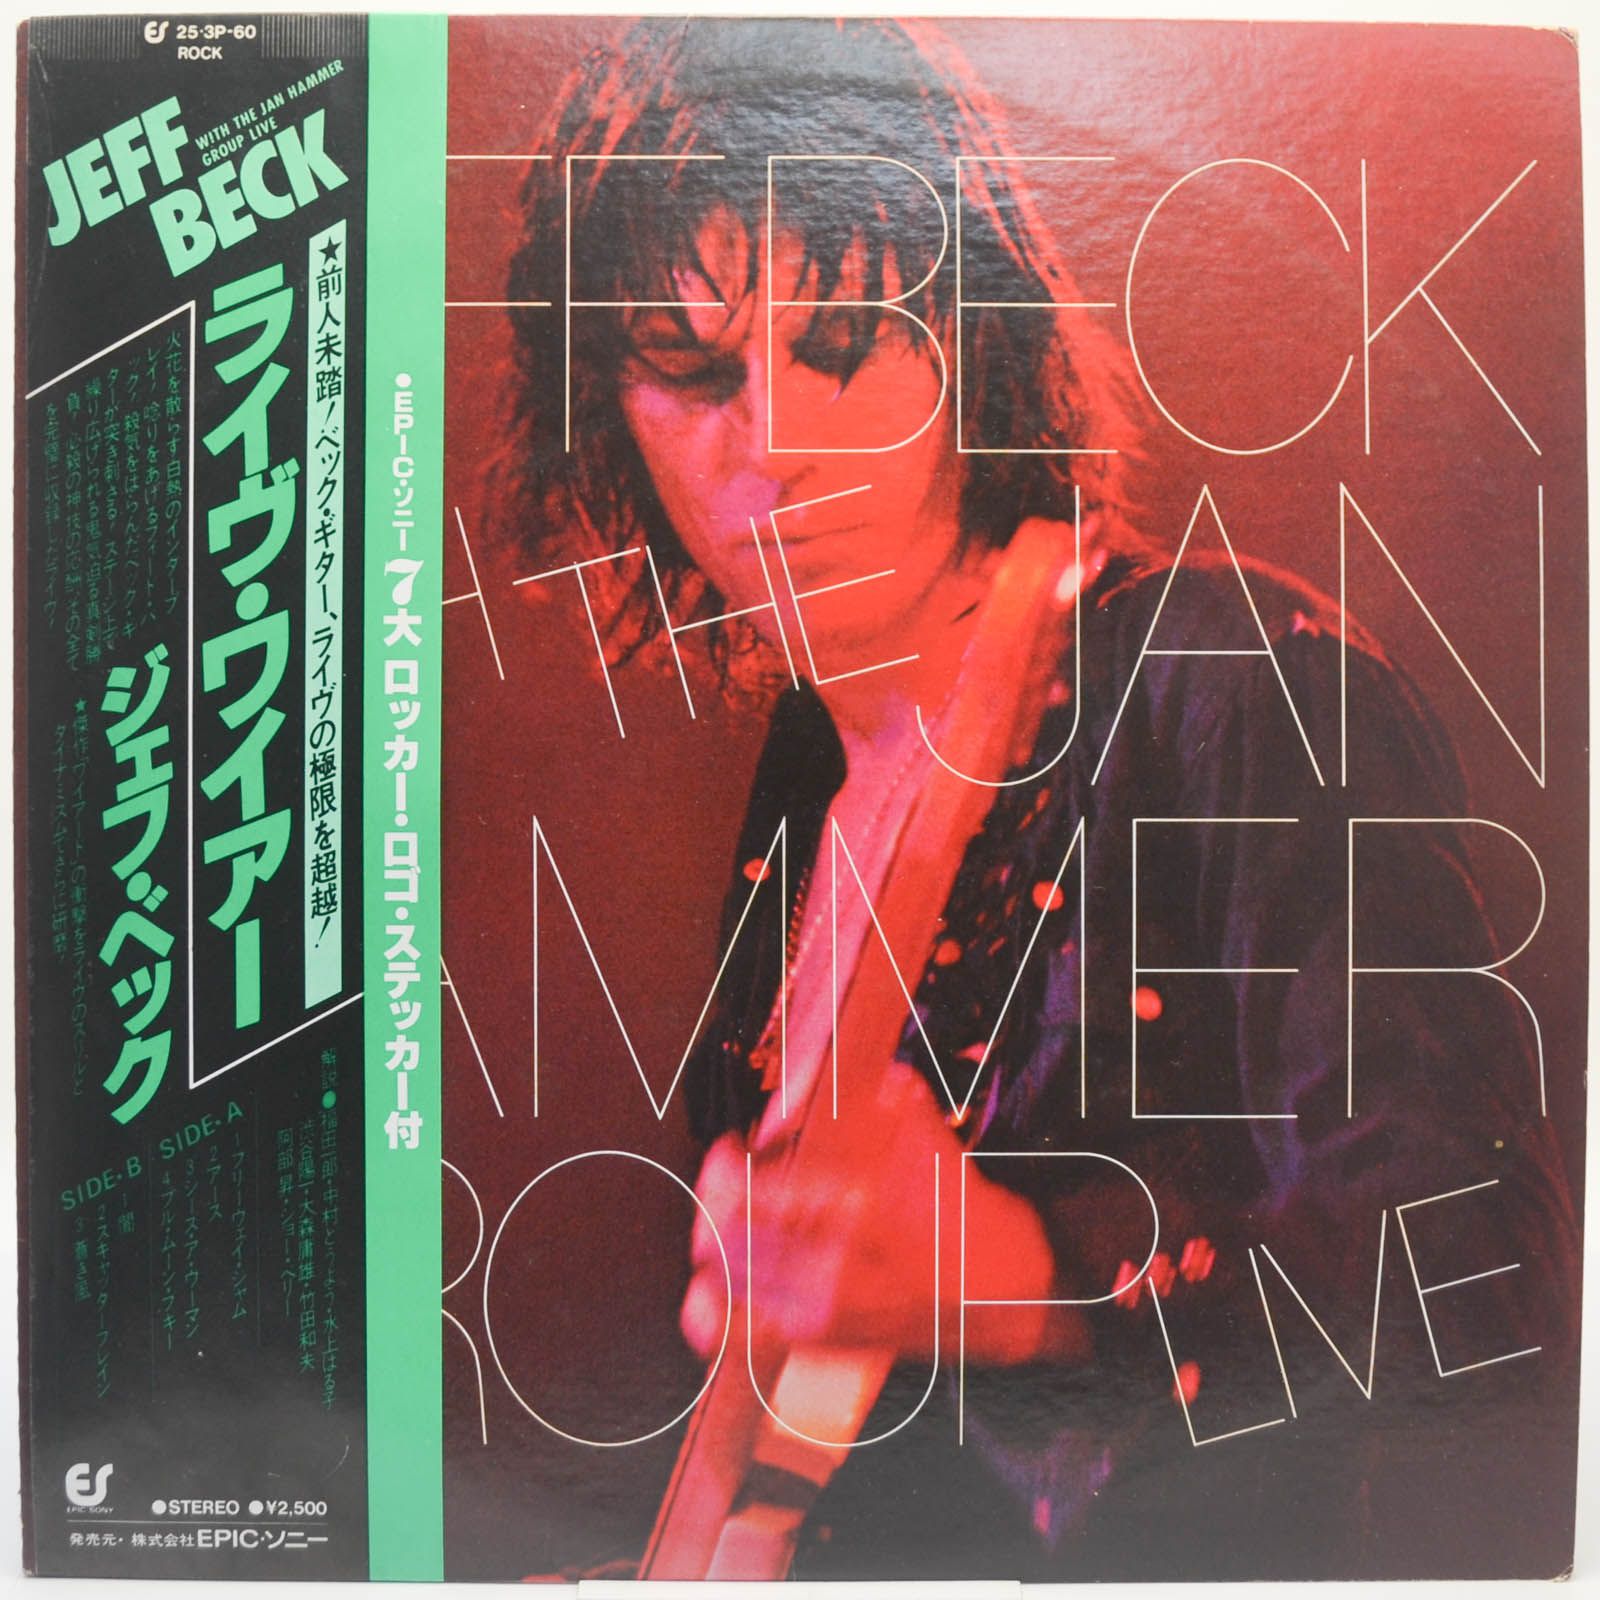 Jeff Beck With The Jan Hammer Group — Live, 1977